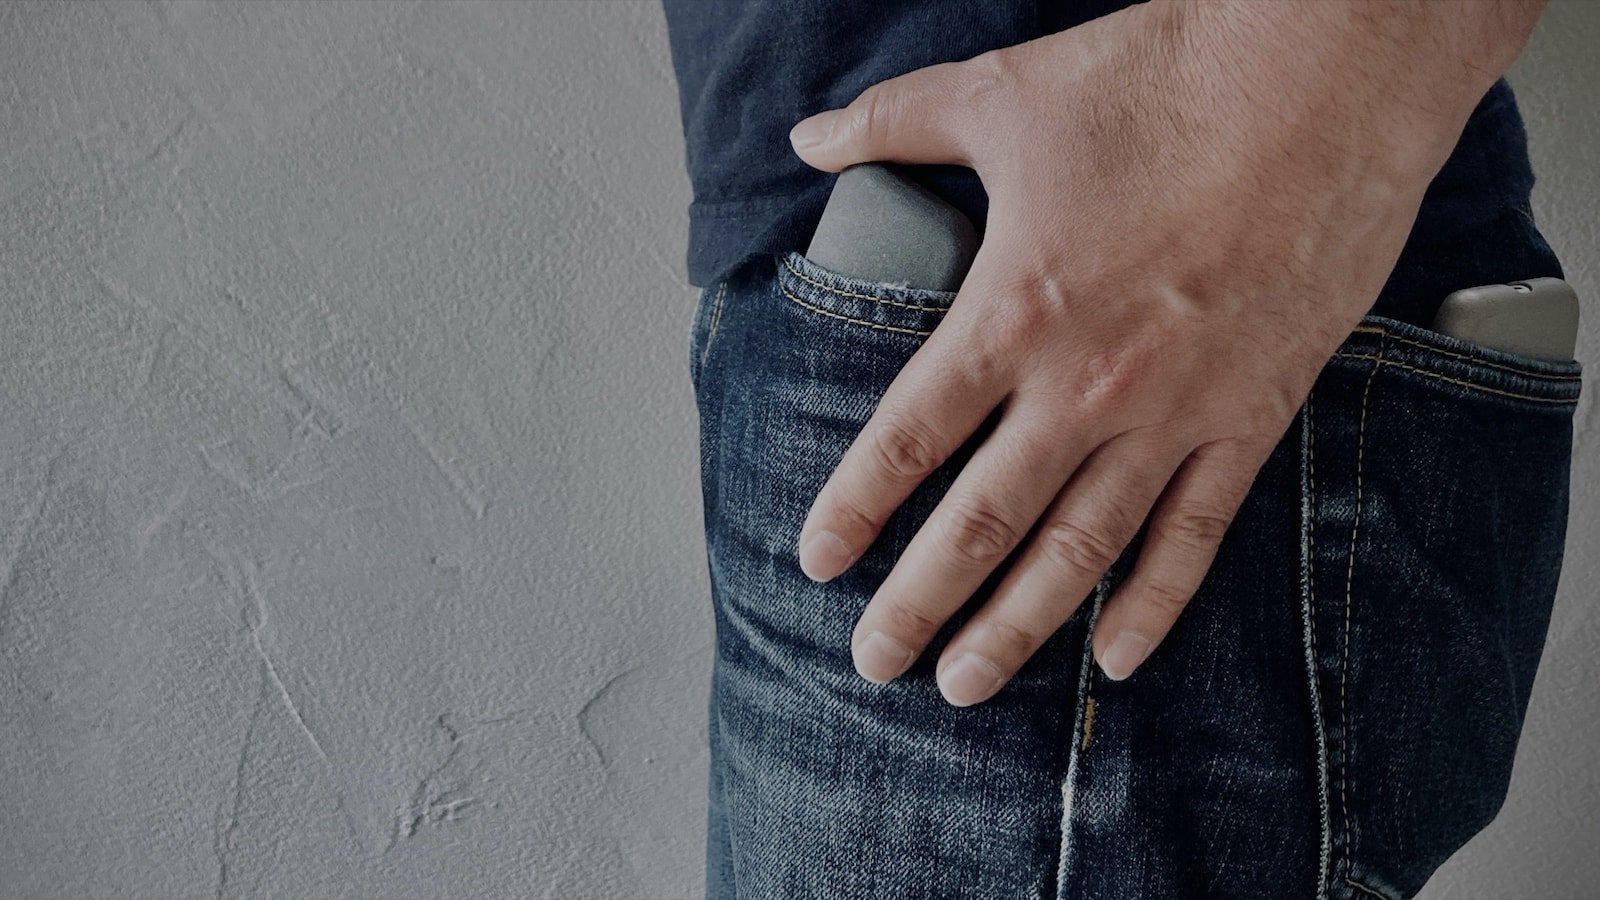 PEBLWEAR wireless music remote responds to gestures when you swipe, slide, or hold